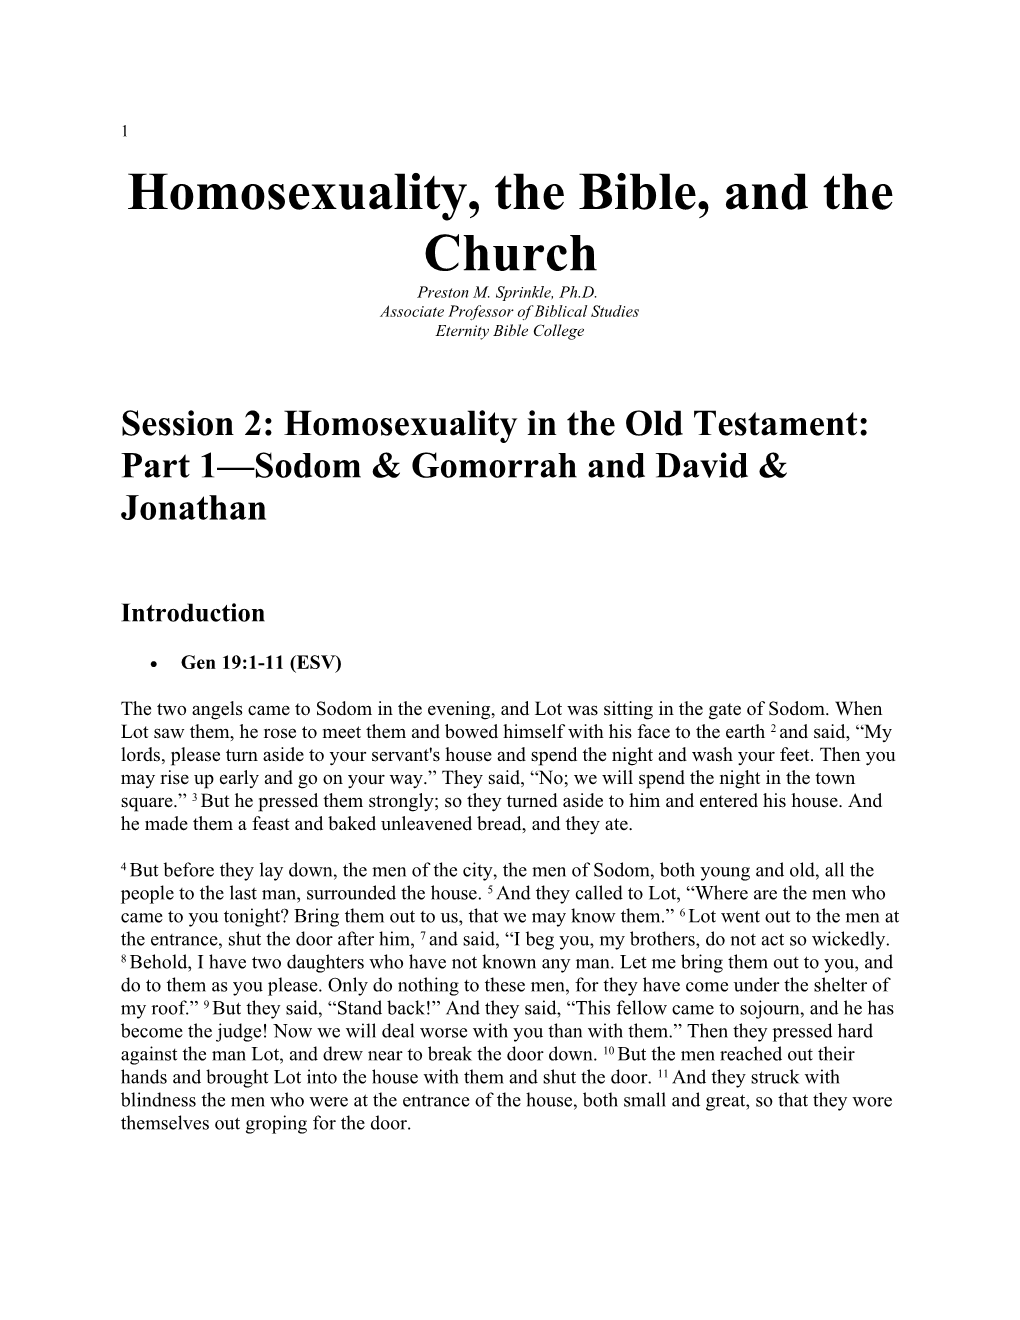 Homosexuality, the Bible, and the Church